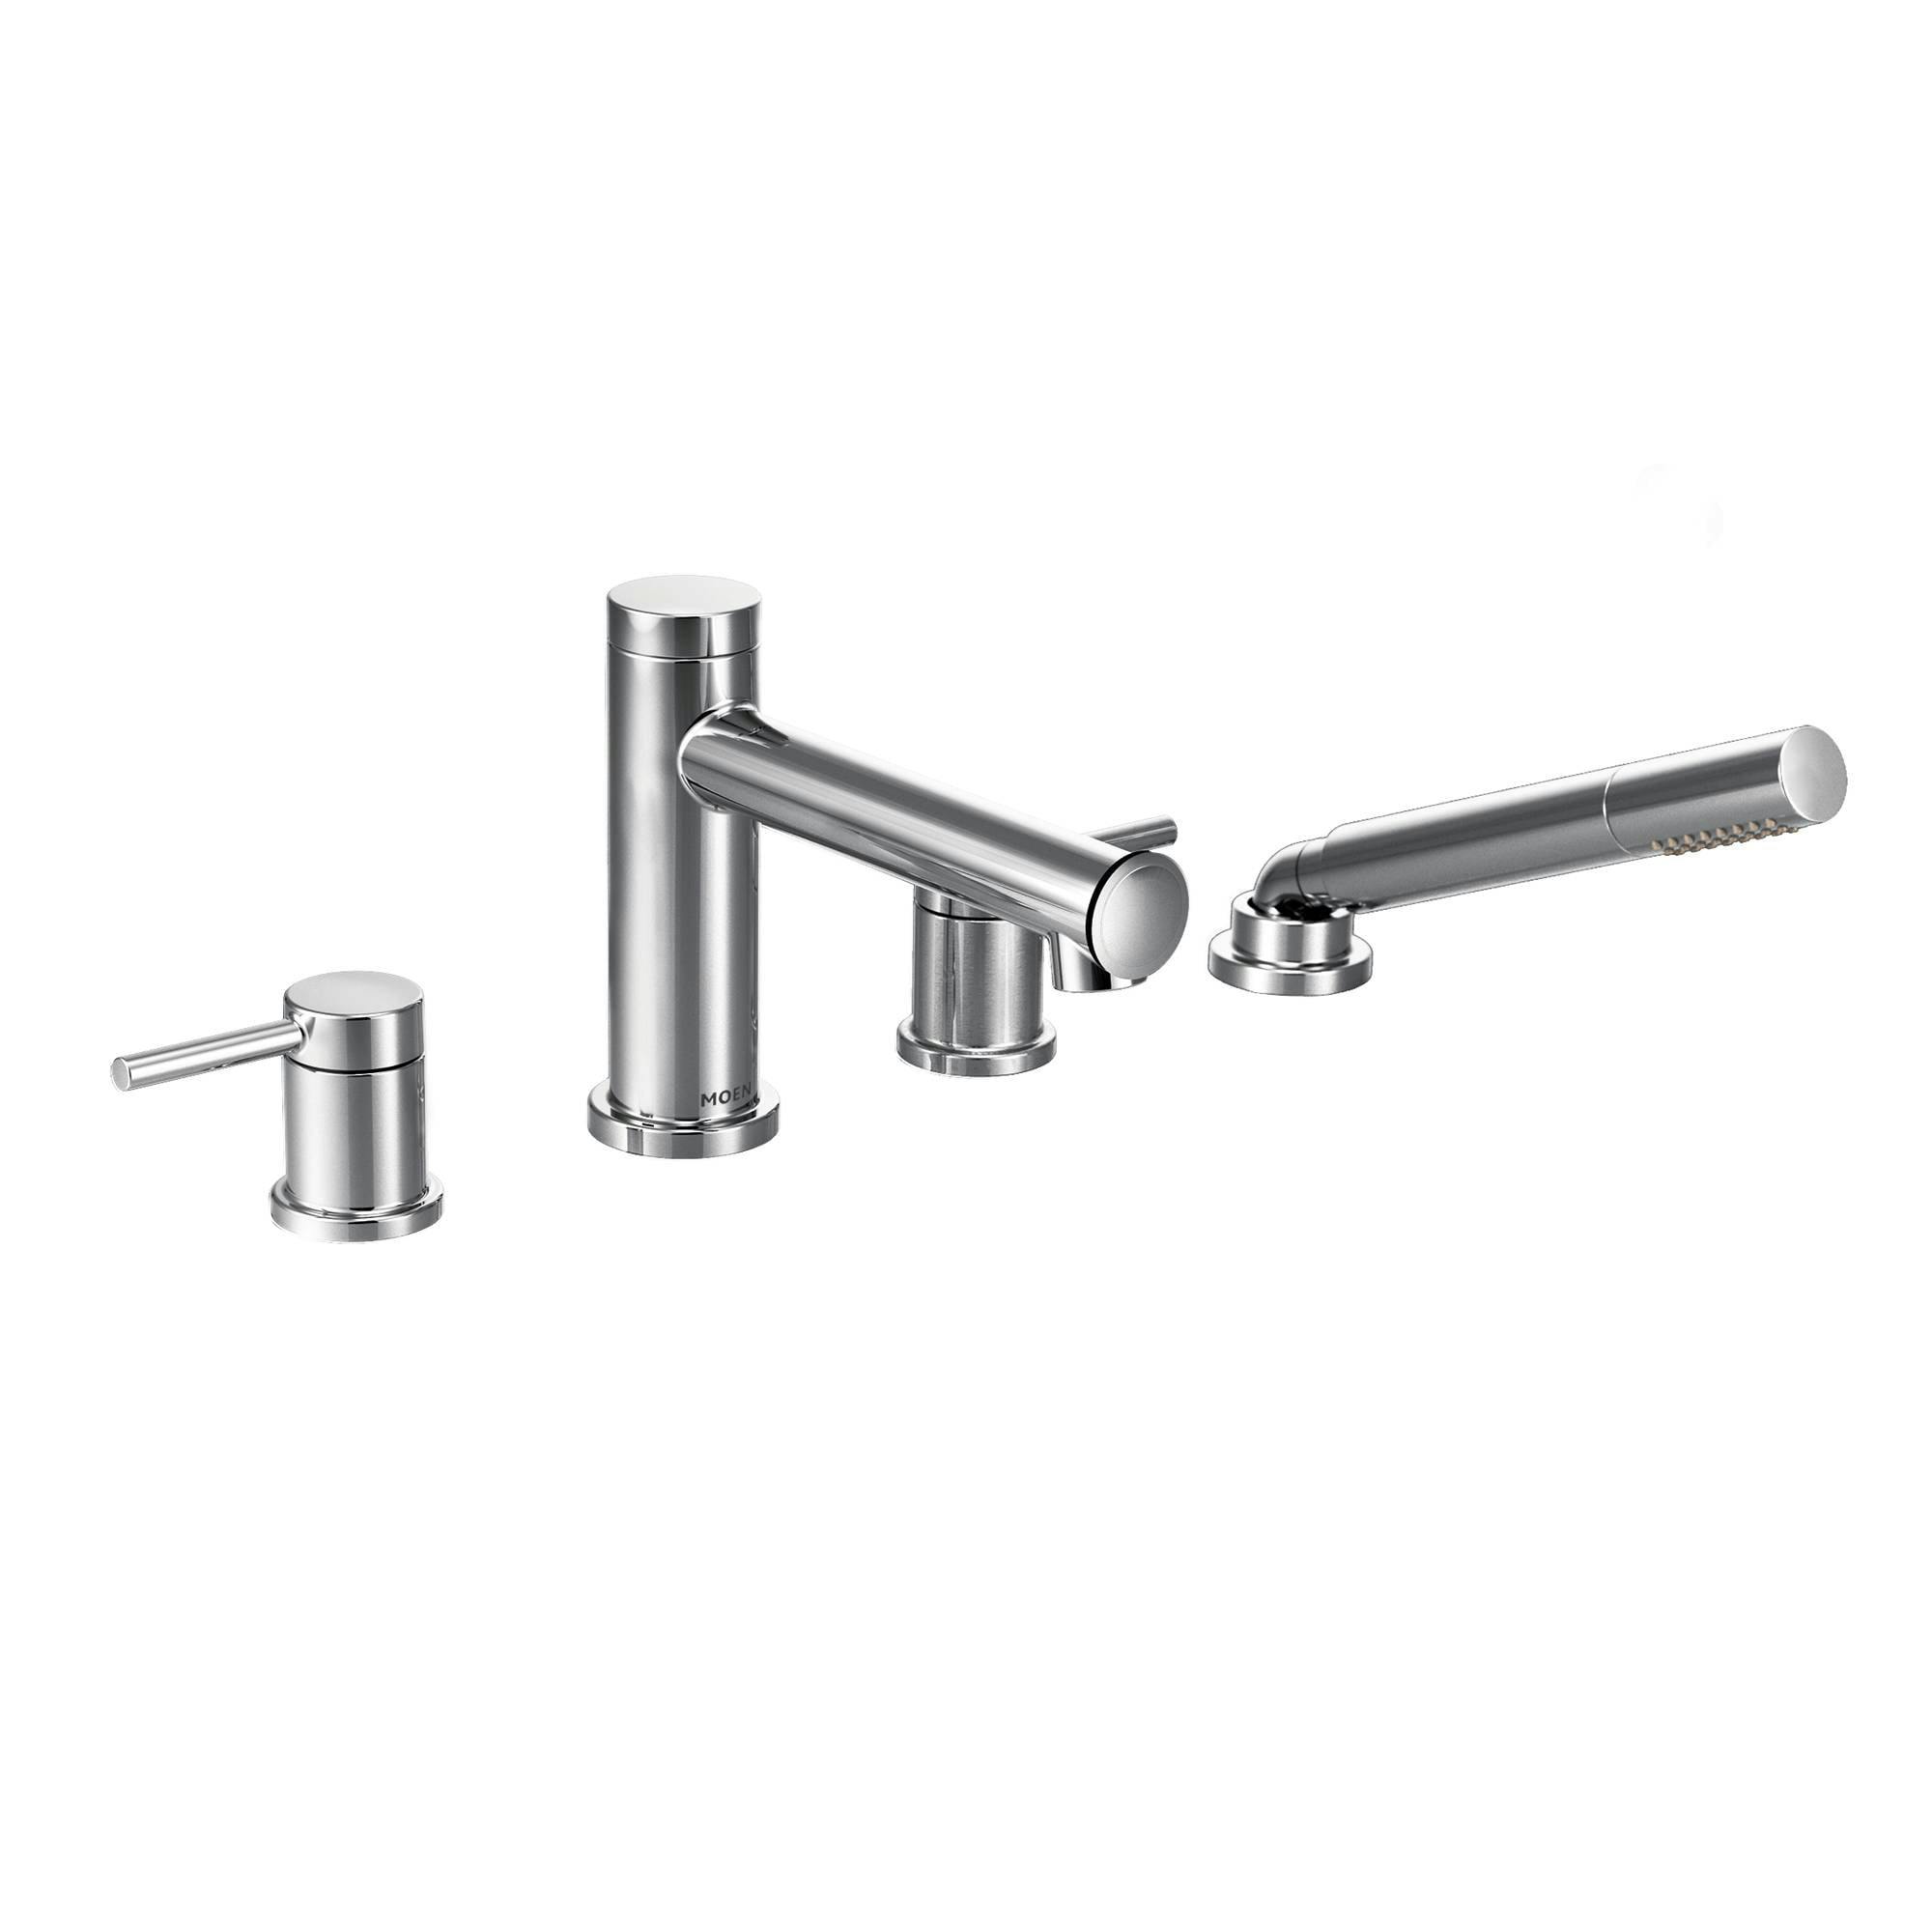 Align Double Handle Deck Mounted Roman Tub Faucet Trim with Diverter and Handshower